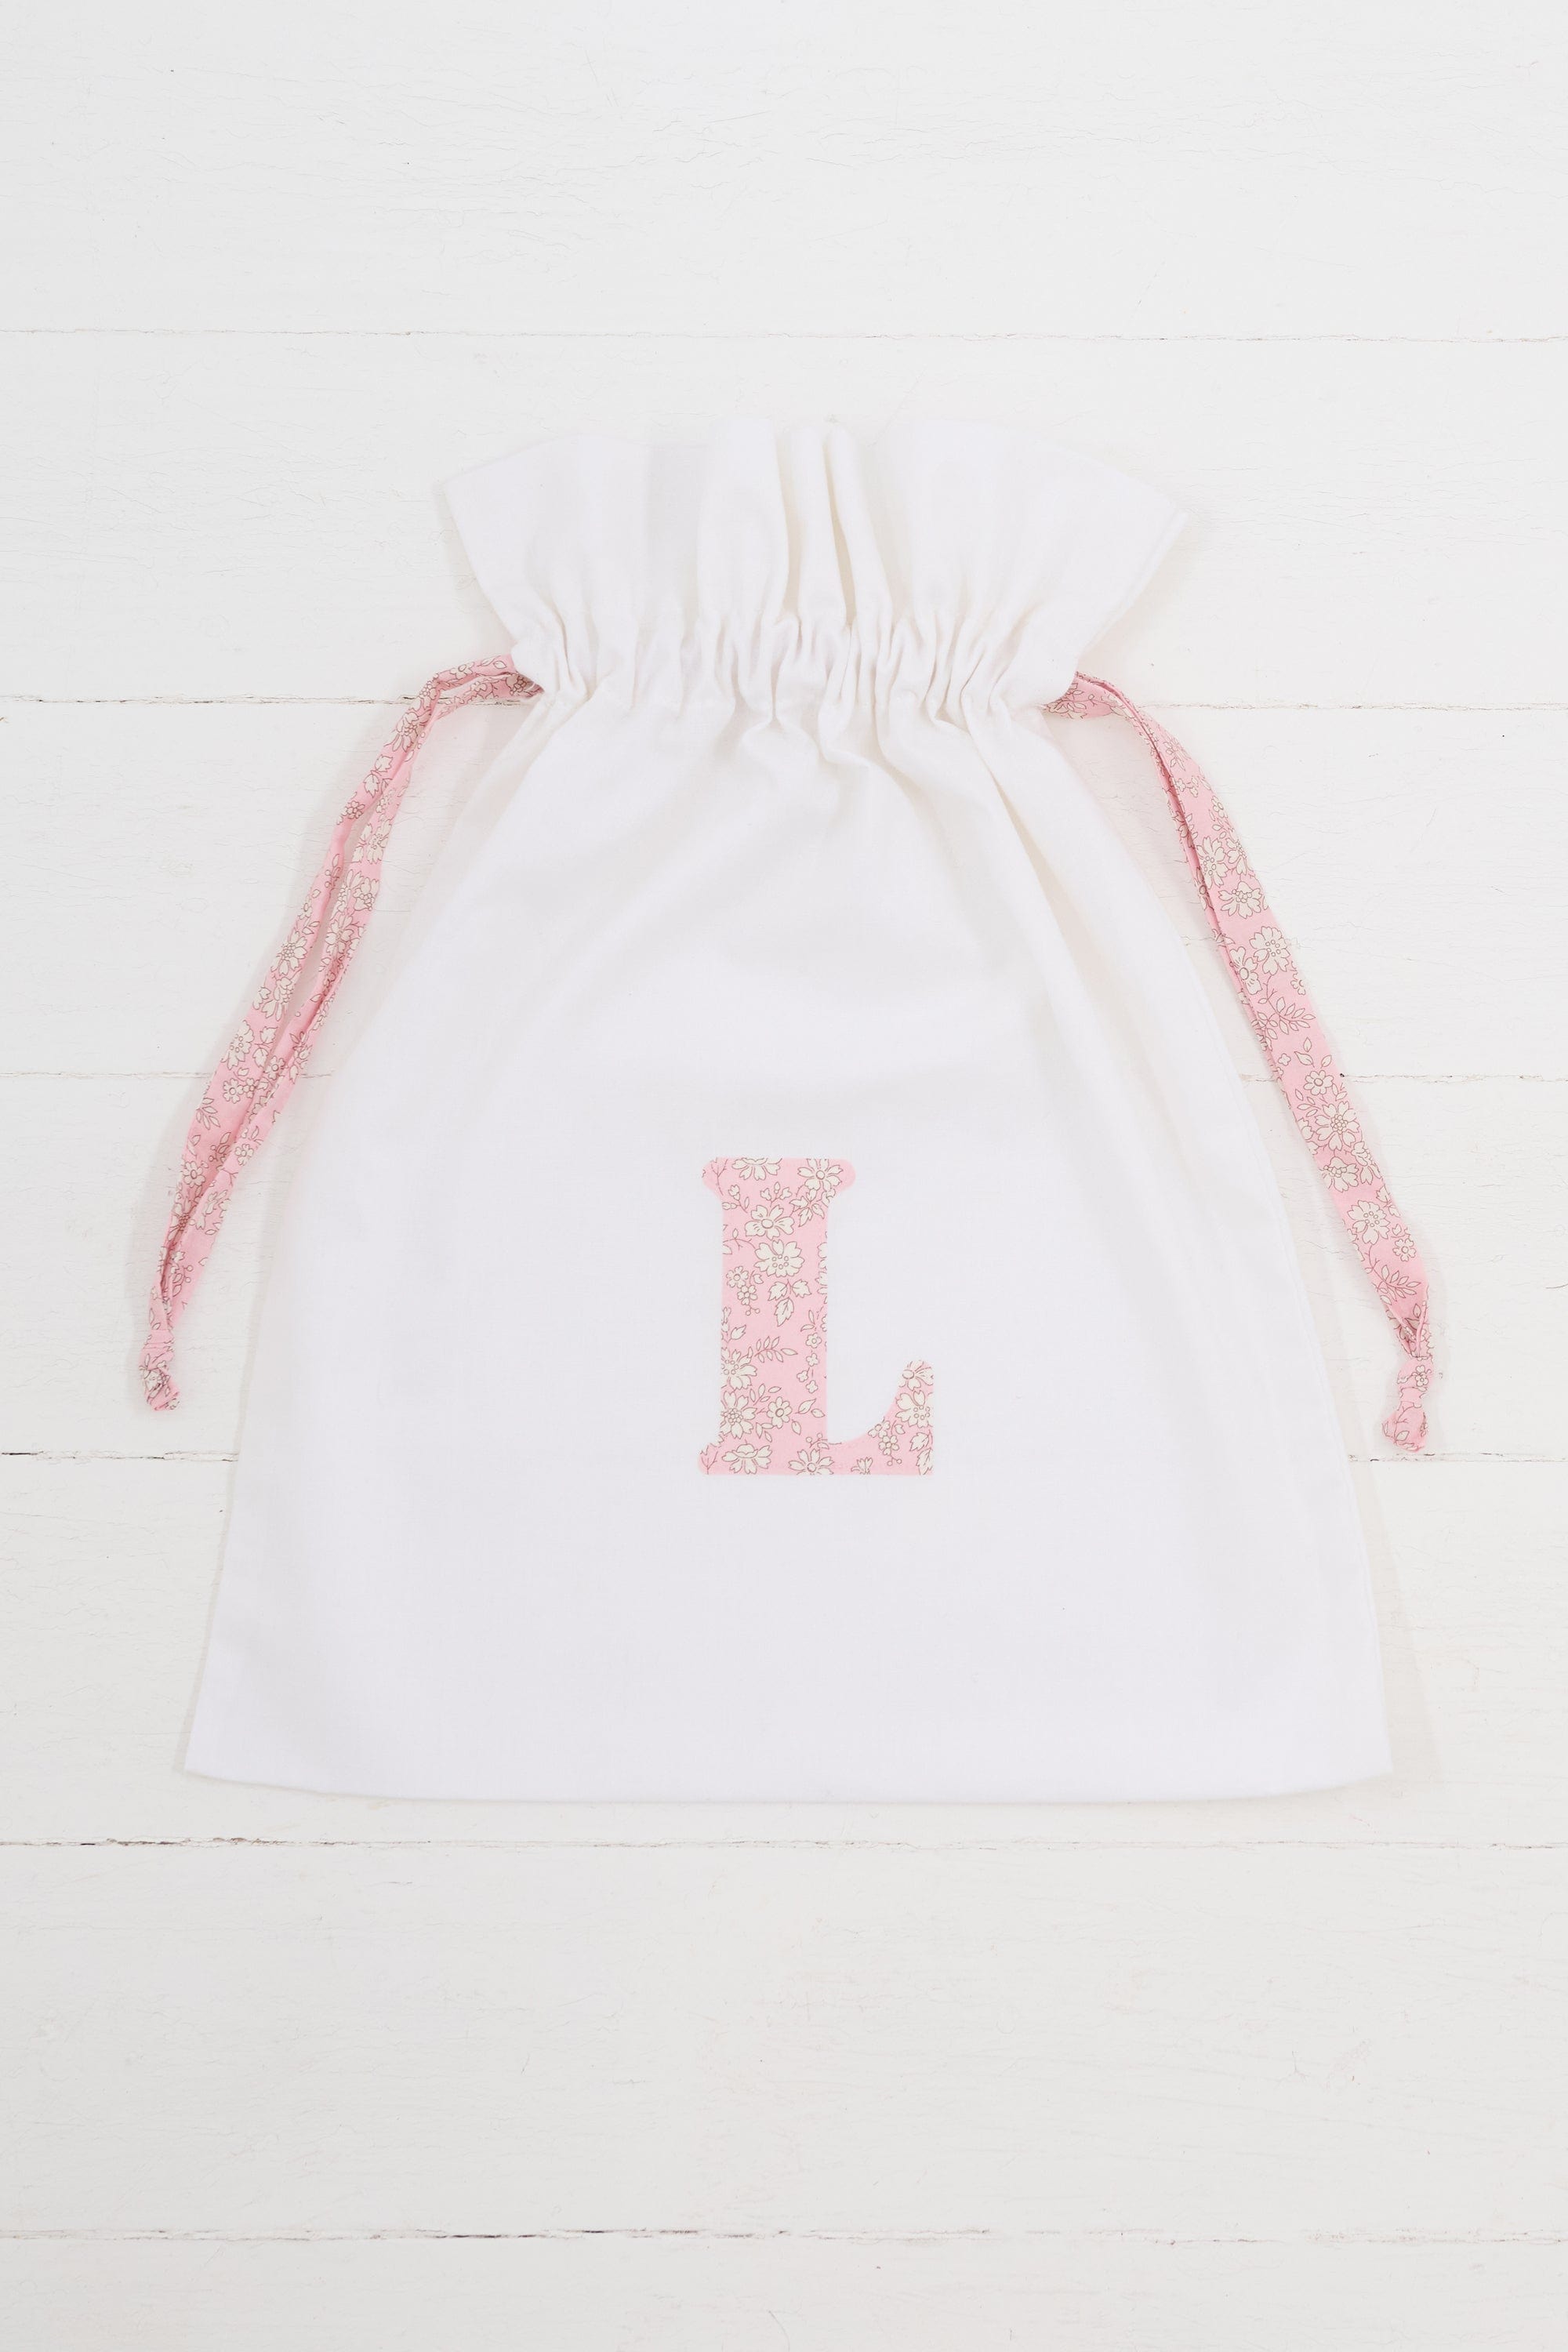 Magnificent Stanley Blush Pink Personalised Gift Bag